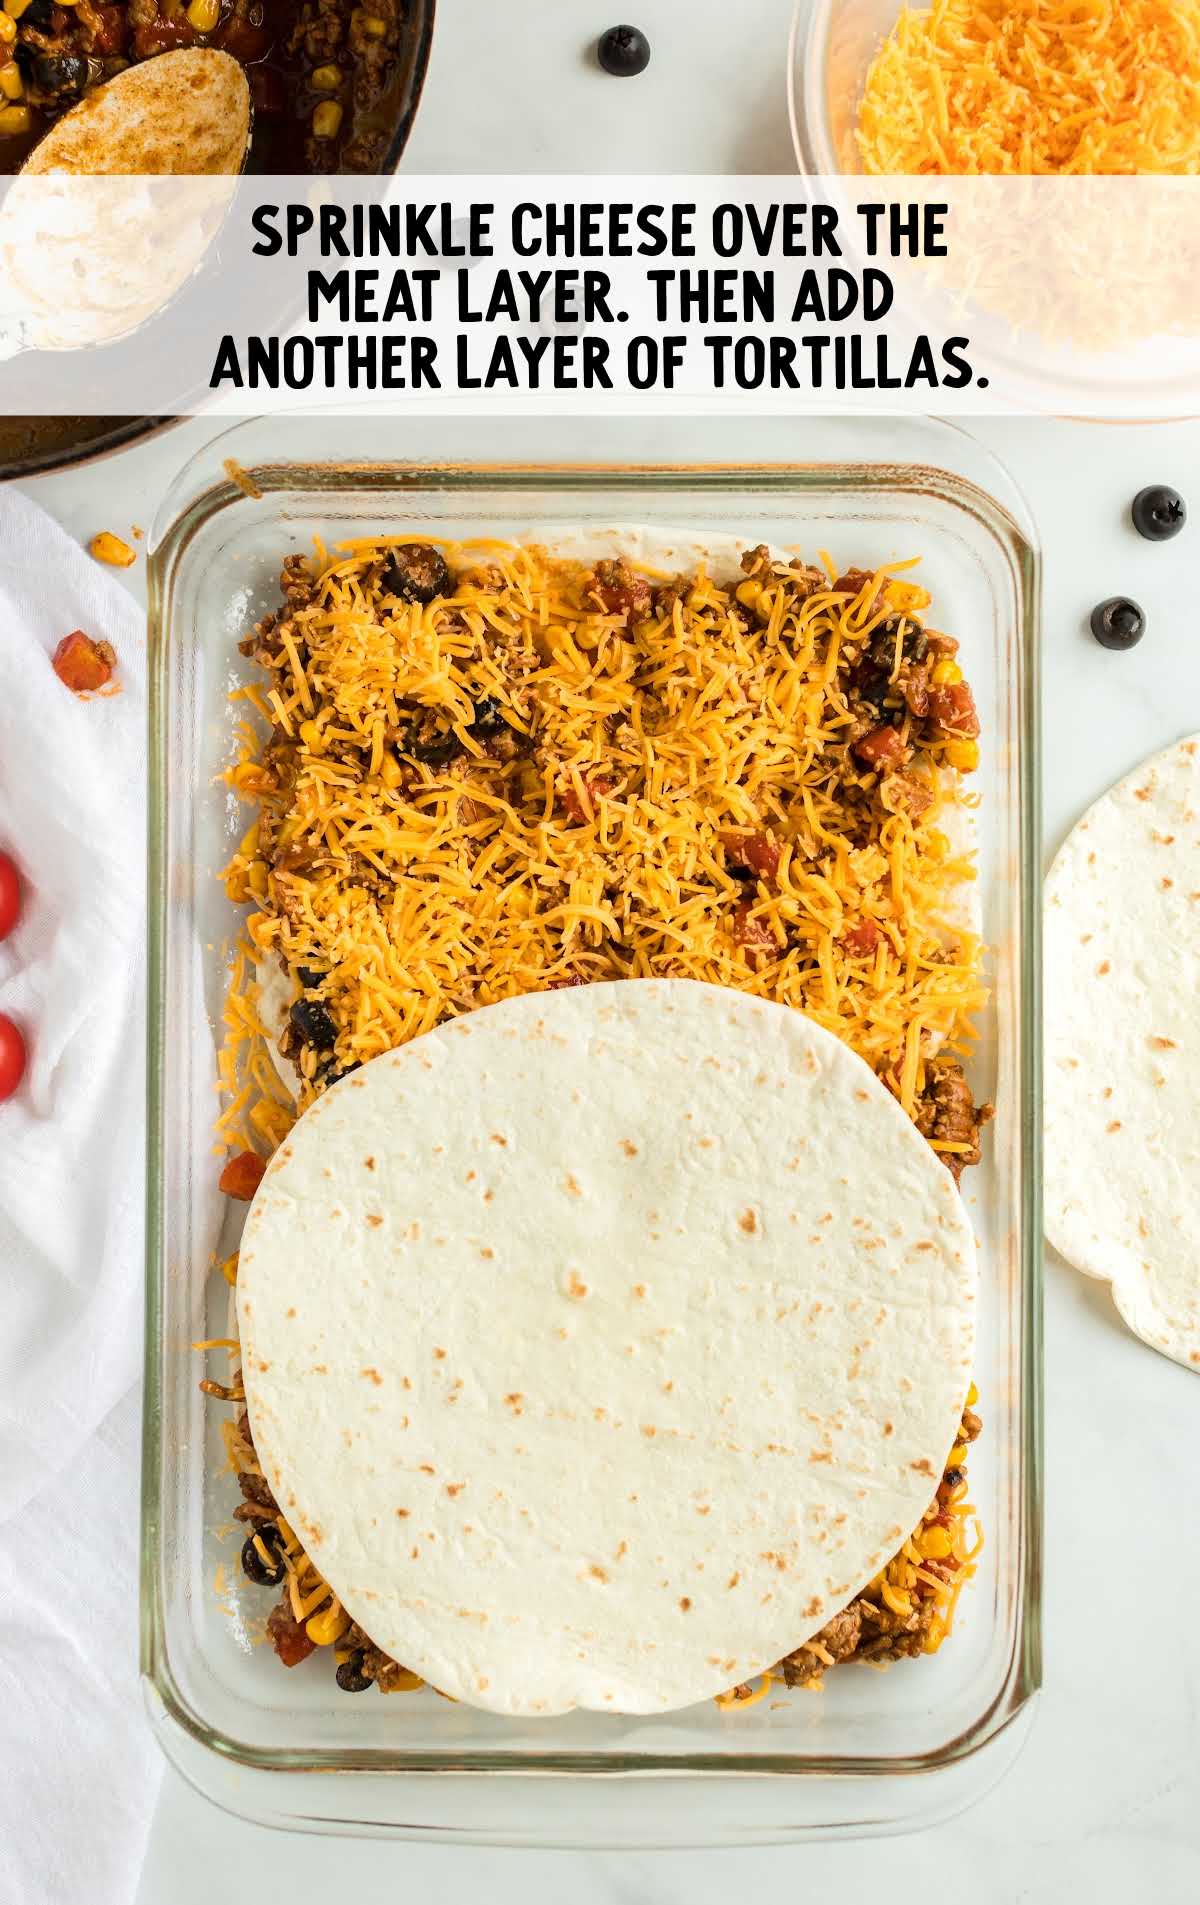 cheese and tortillas placed on top of the meat mixture in a baking dish